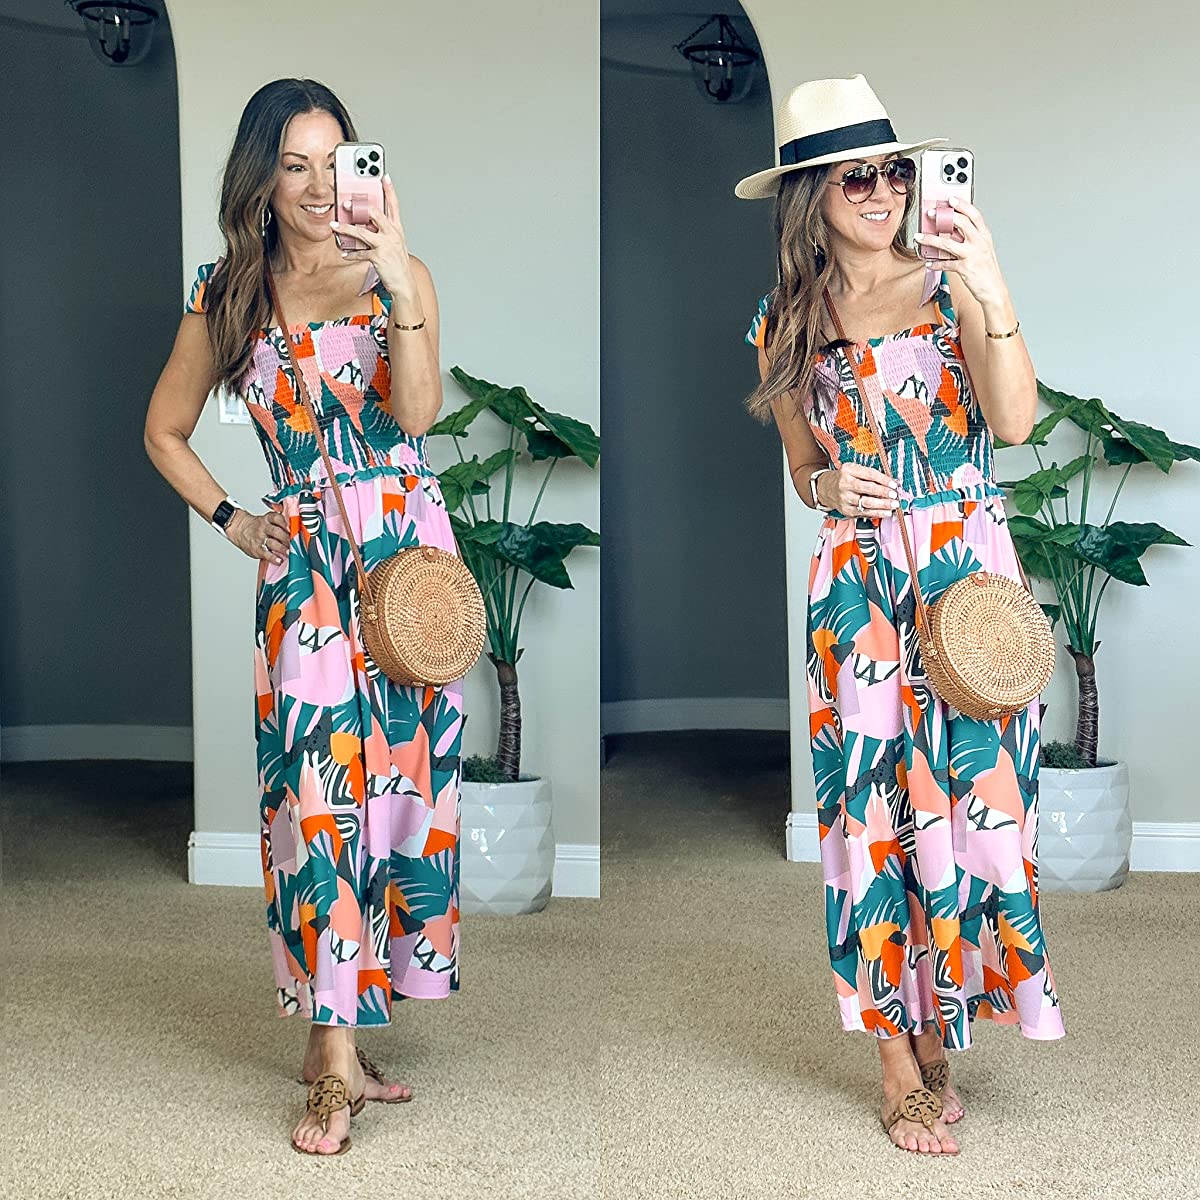 summer dress, floral maxi dress, beach hat, sunglasses, spring style, spring break, beach style, sandals, top selling fashion, best selling